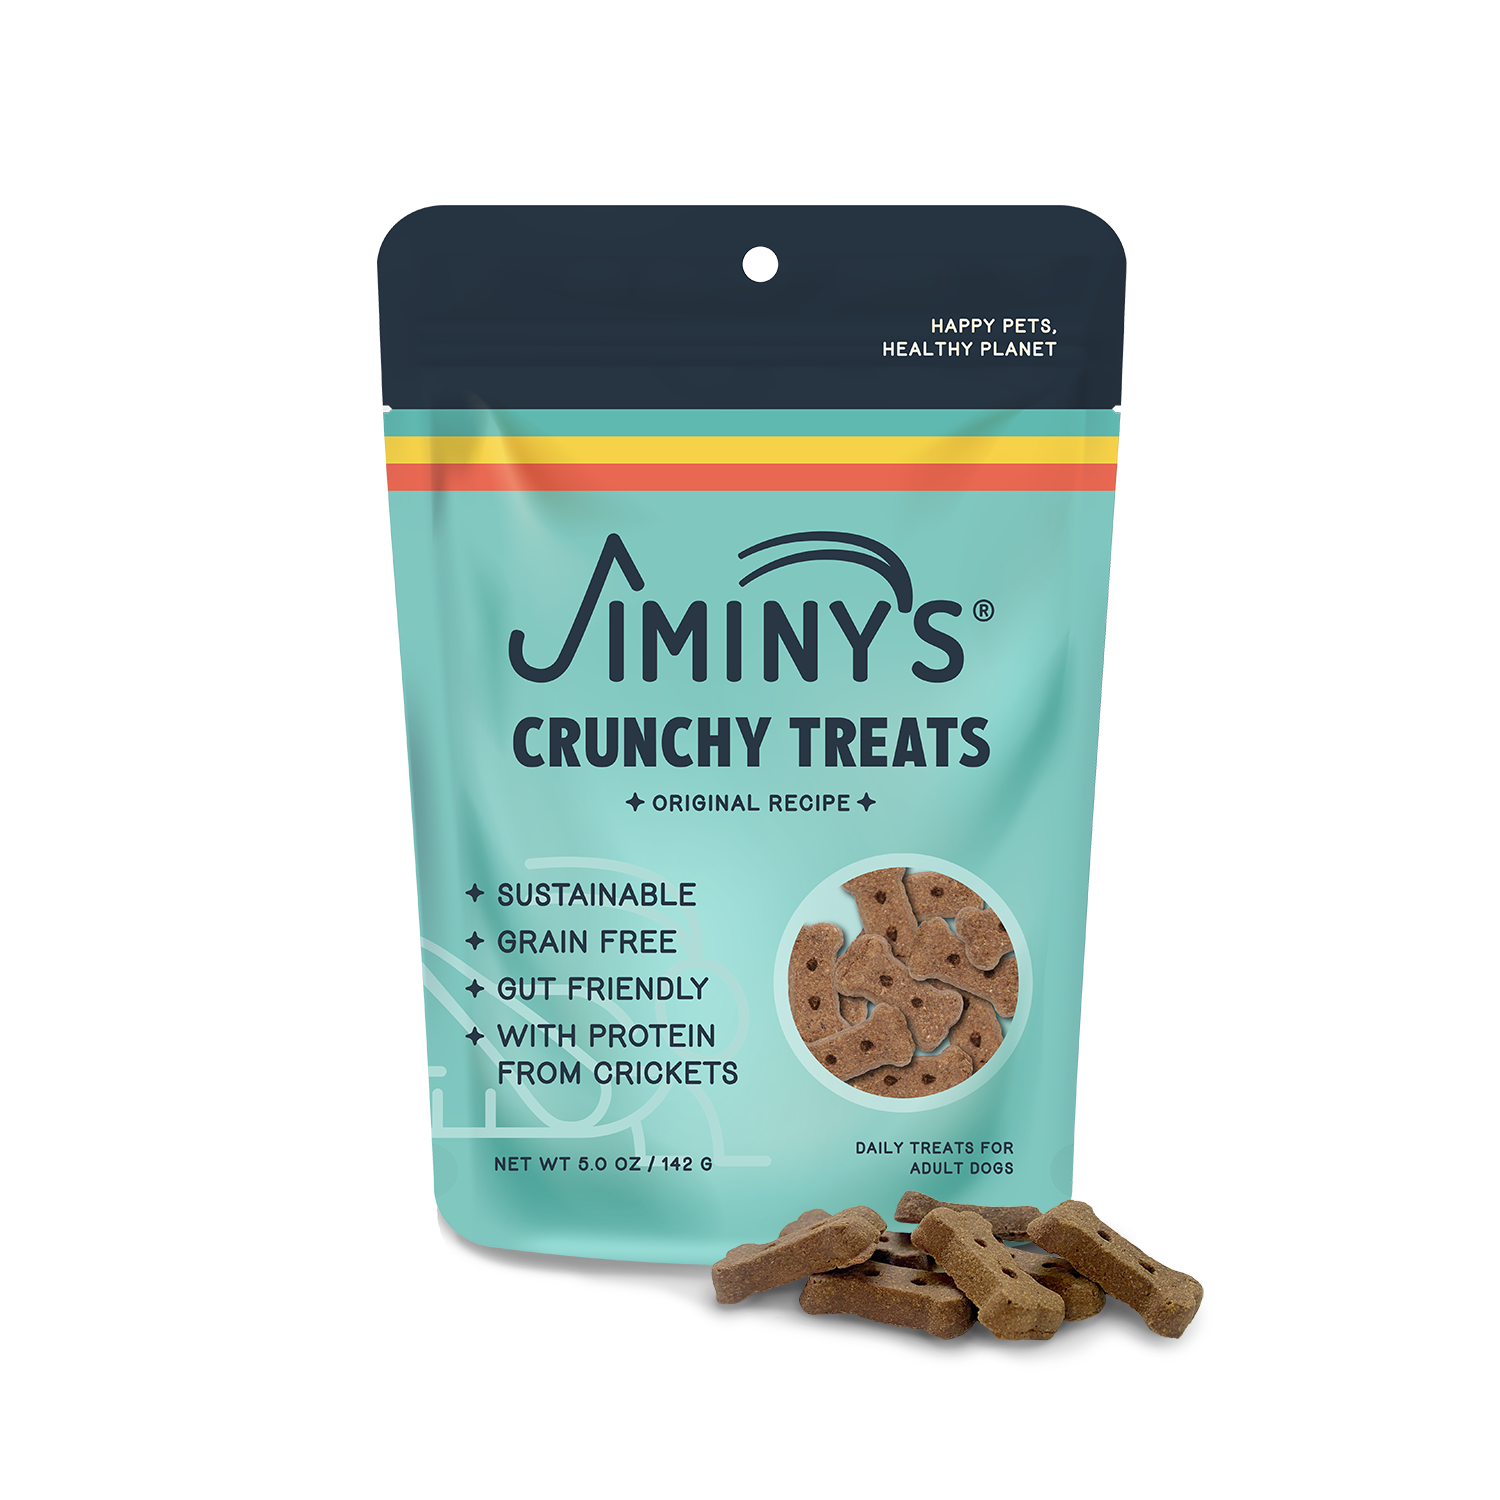 Jiminy's Original Recipe Dog Treats: soft-Baked Biscuits Dog Biscuits with Crickets, Lentils, Pumpkin front